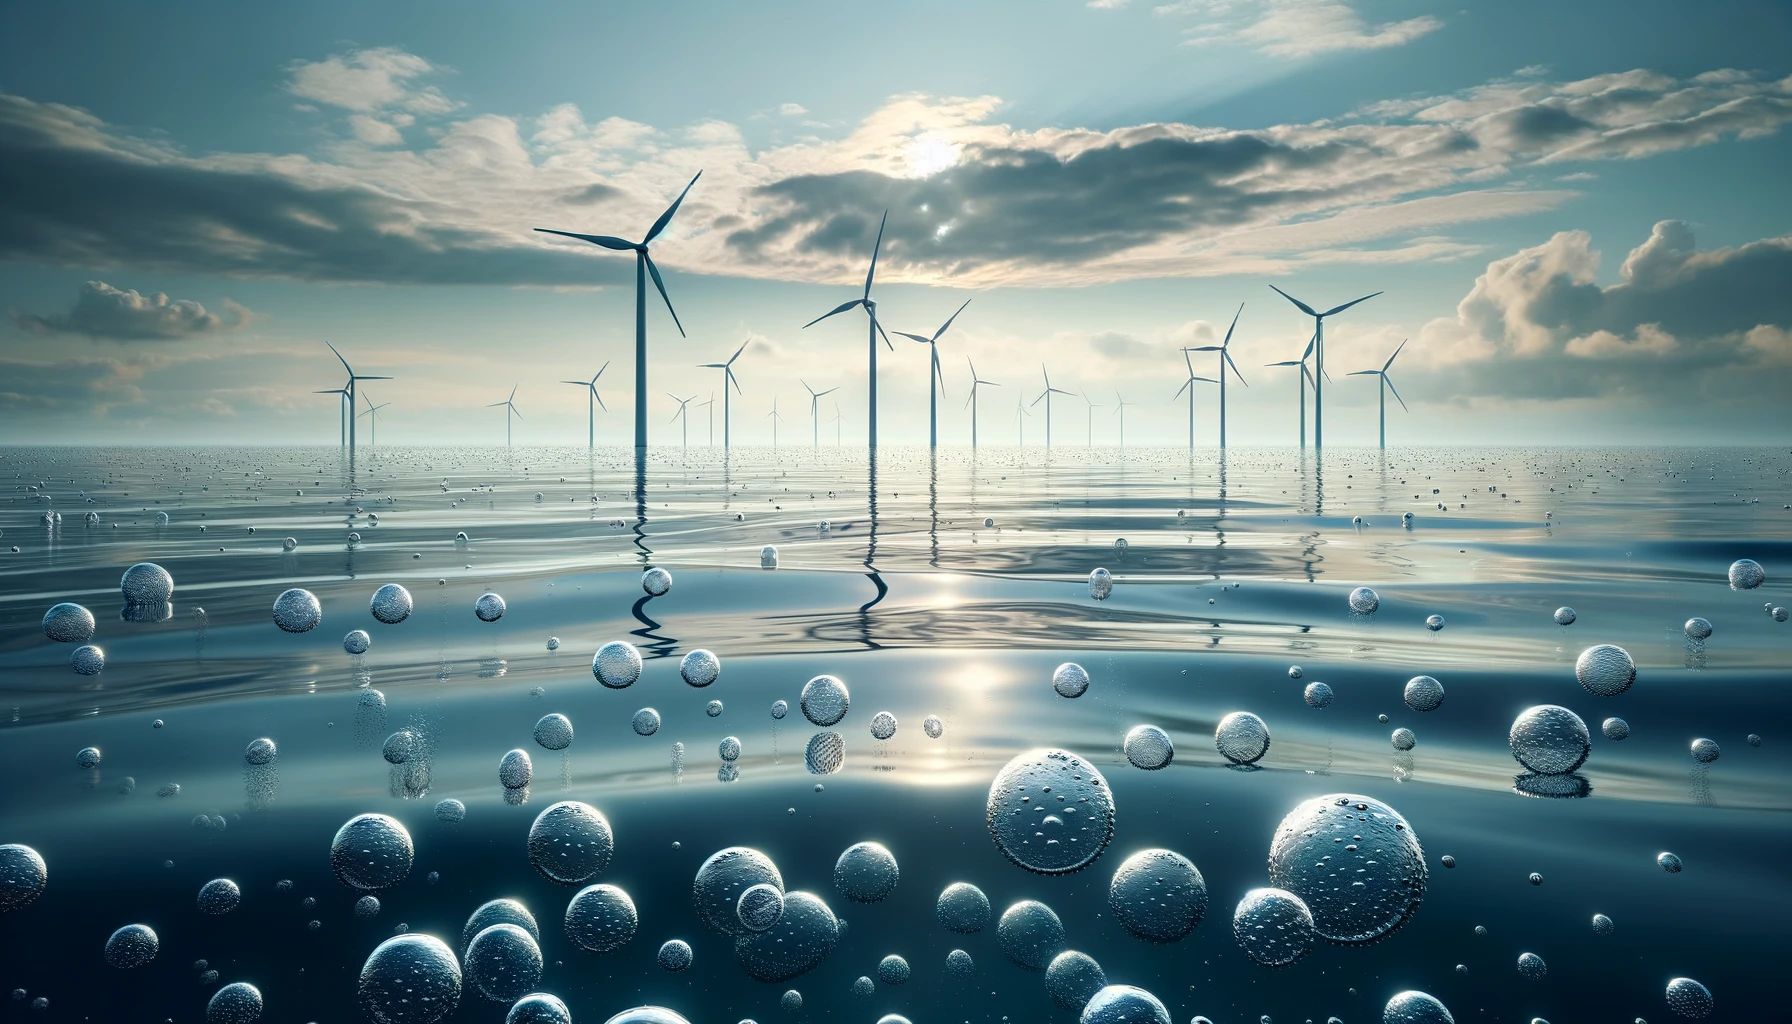 The Baltic Sea, oxygen bubbles and wind turbines